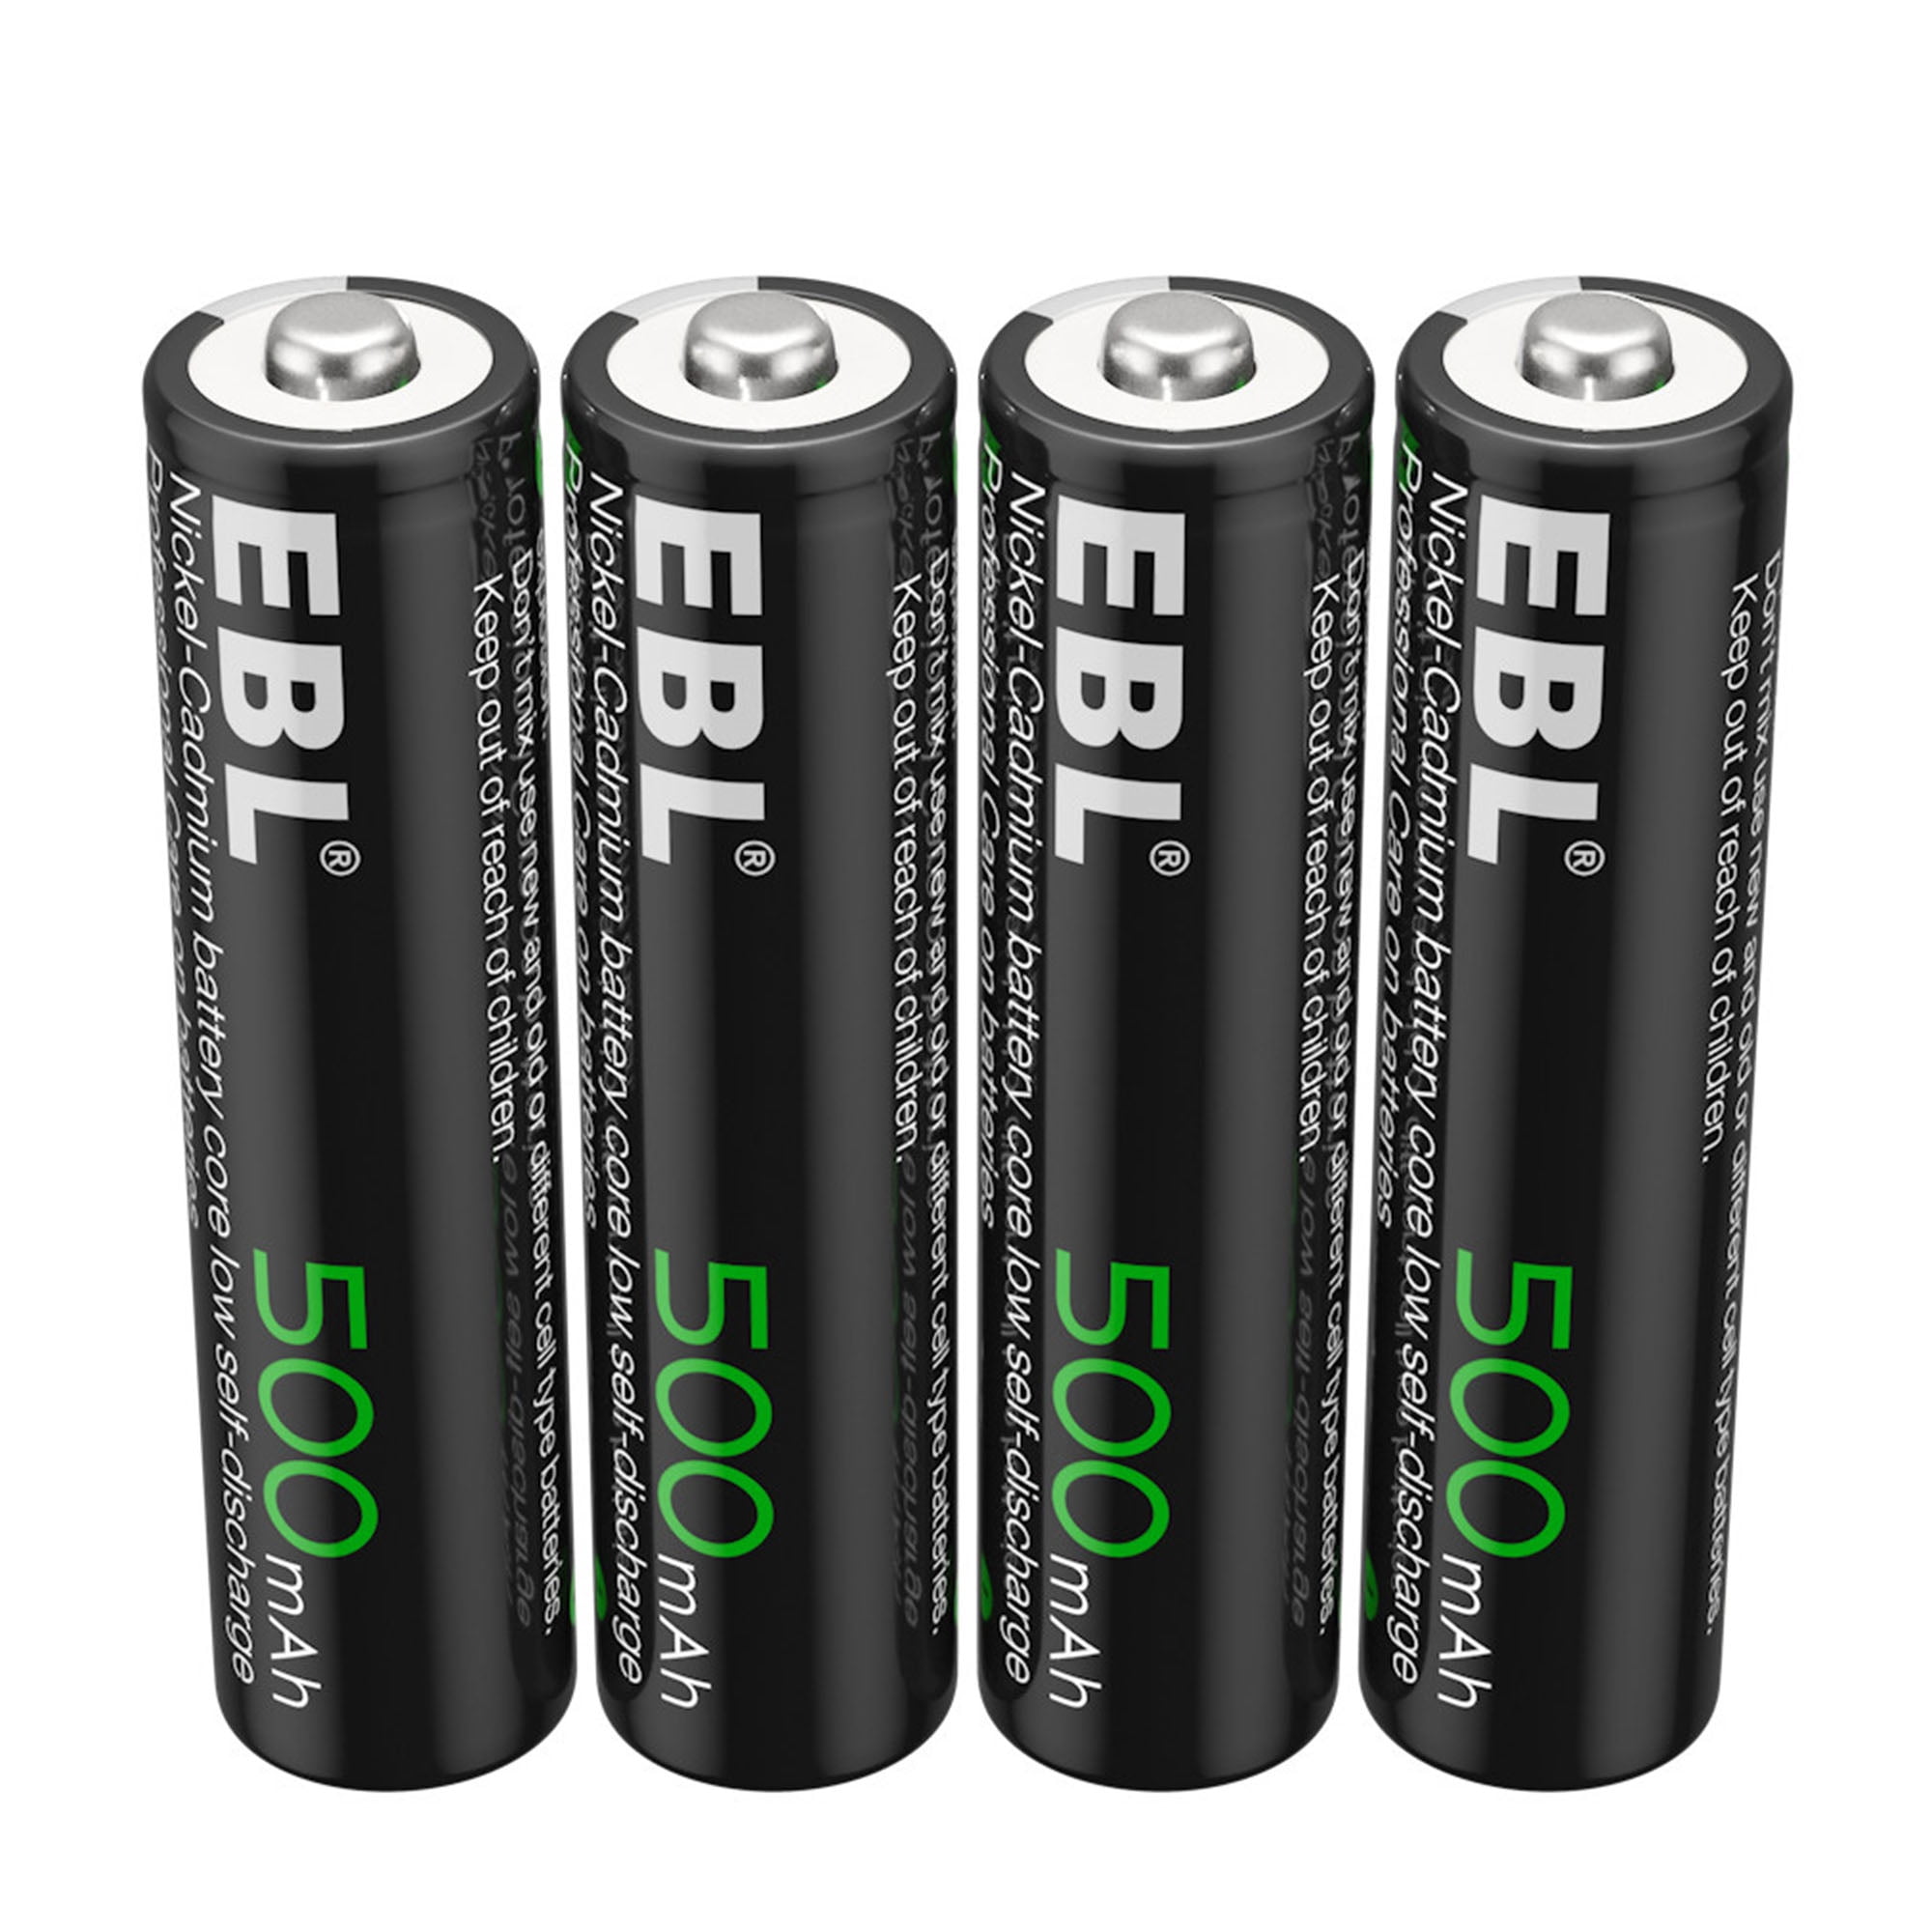 ENERGIZER AAA 500mAh UNIVERSAL RECHARGEABLE BATTERIES PRE-CHARGED 